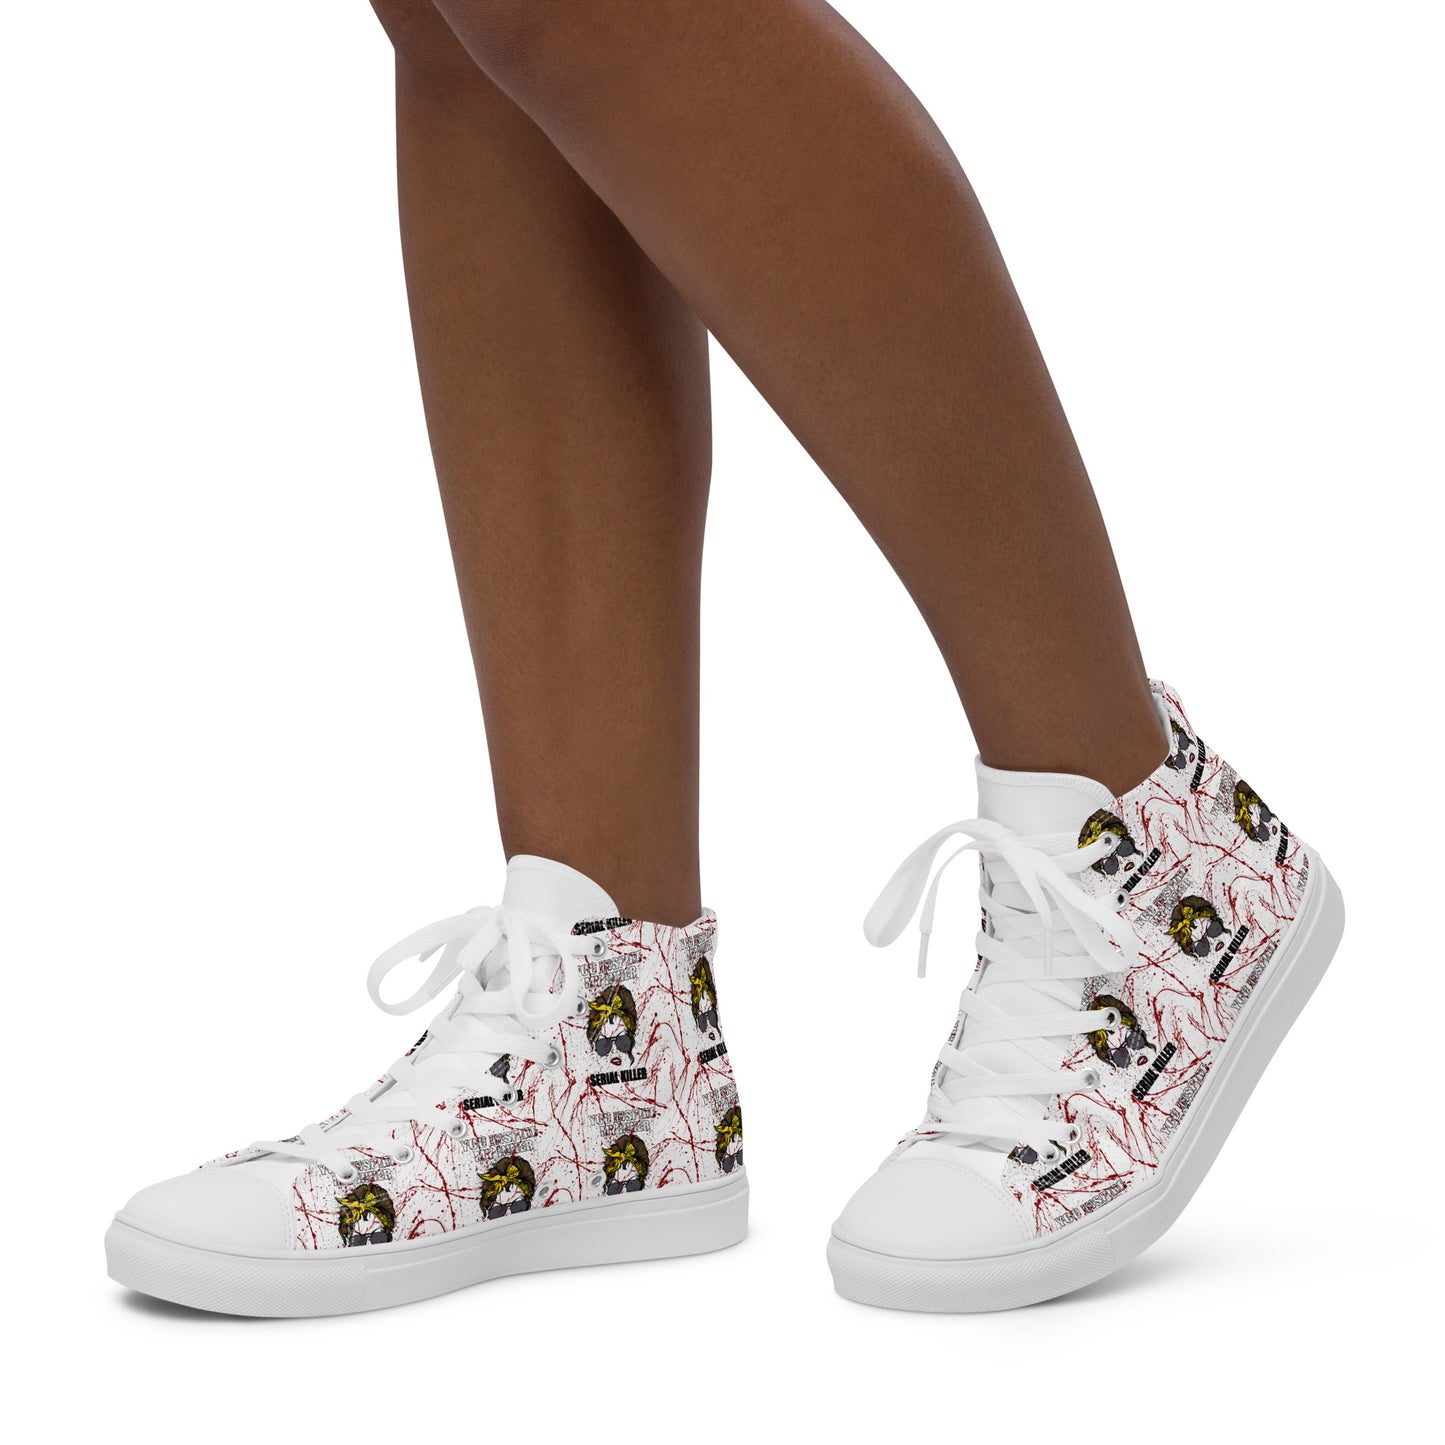 You Inspire my Inner Serial Killer Women’s high top shoes (sold in US sizes, use size guide)